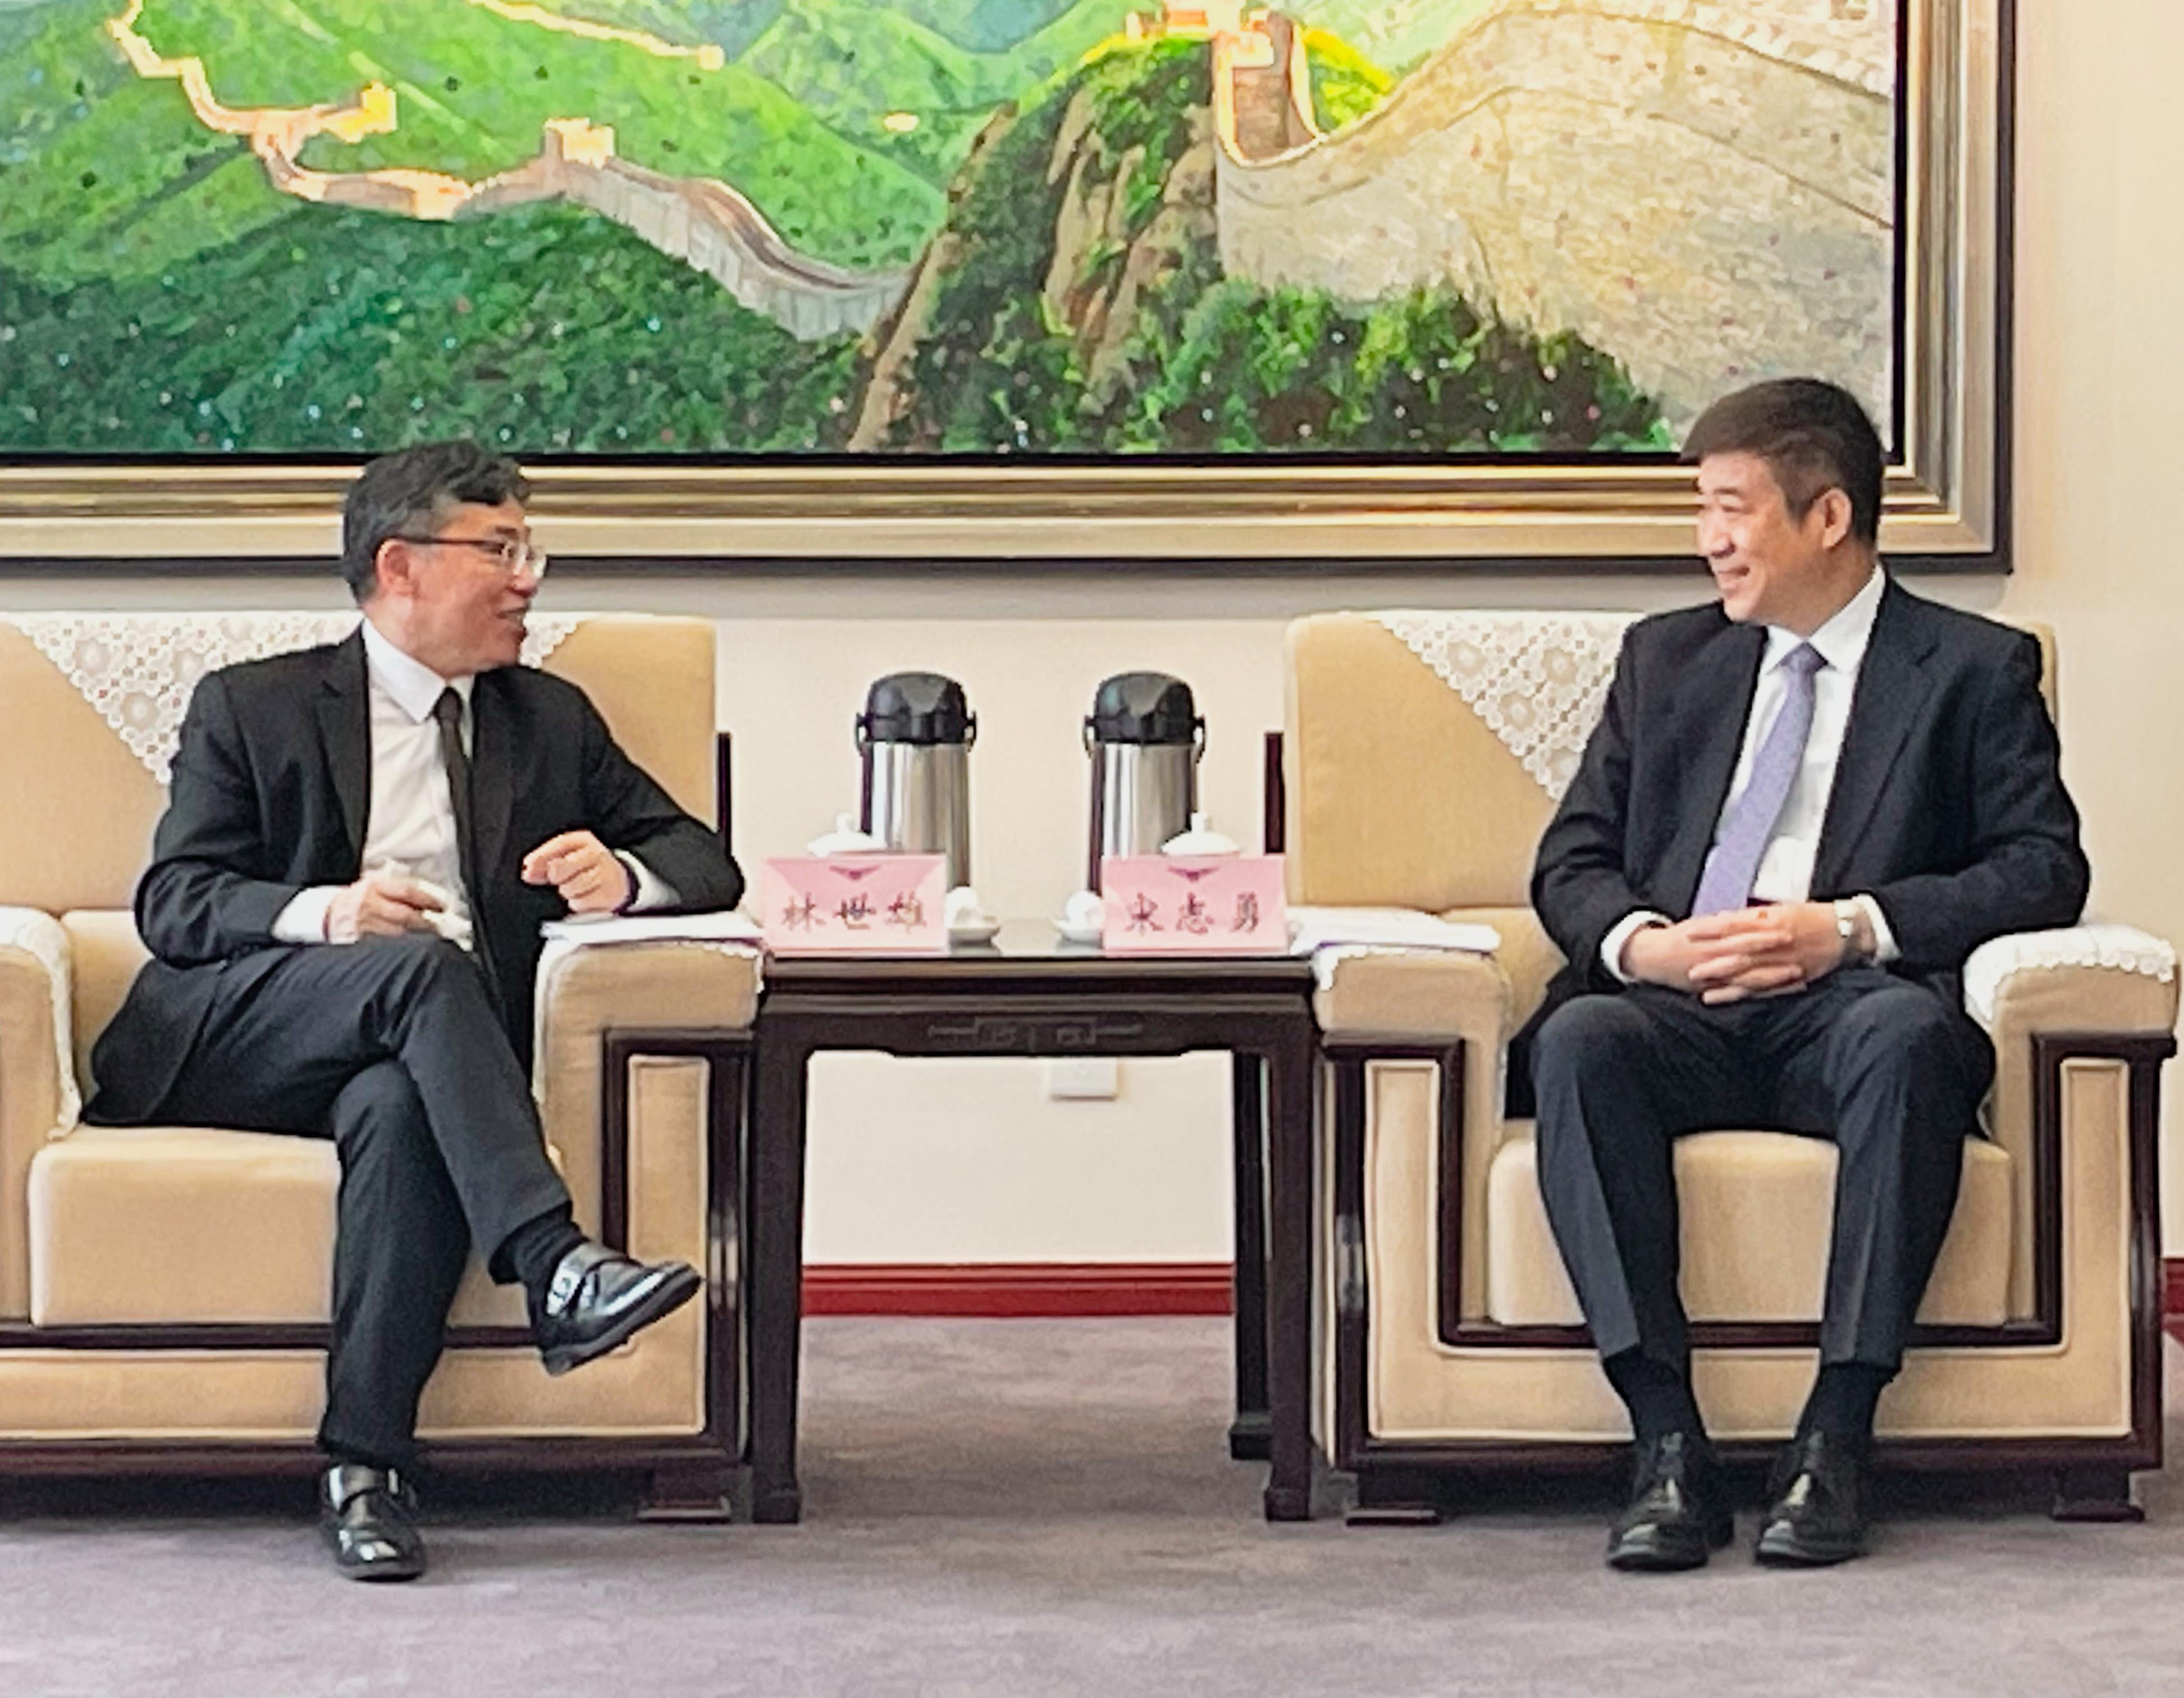 The Secretary for Transport and Logistics, Mr Lam Sai-hung, began his two-day visit in Beijing today (April 19). Photo shows Mr Lam (left) meeting with the Administrator of the Civil Aviation Administration of China, Mr Song Zhiyong.
